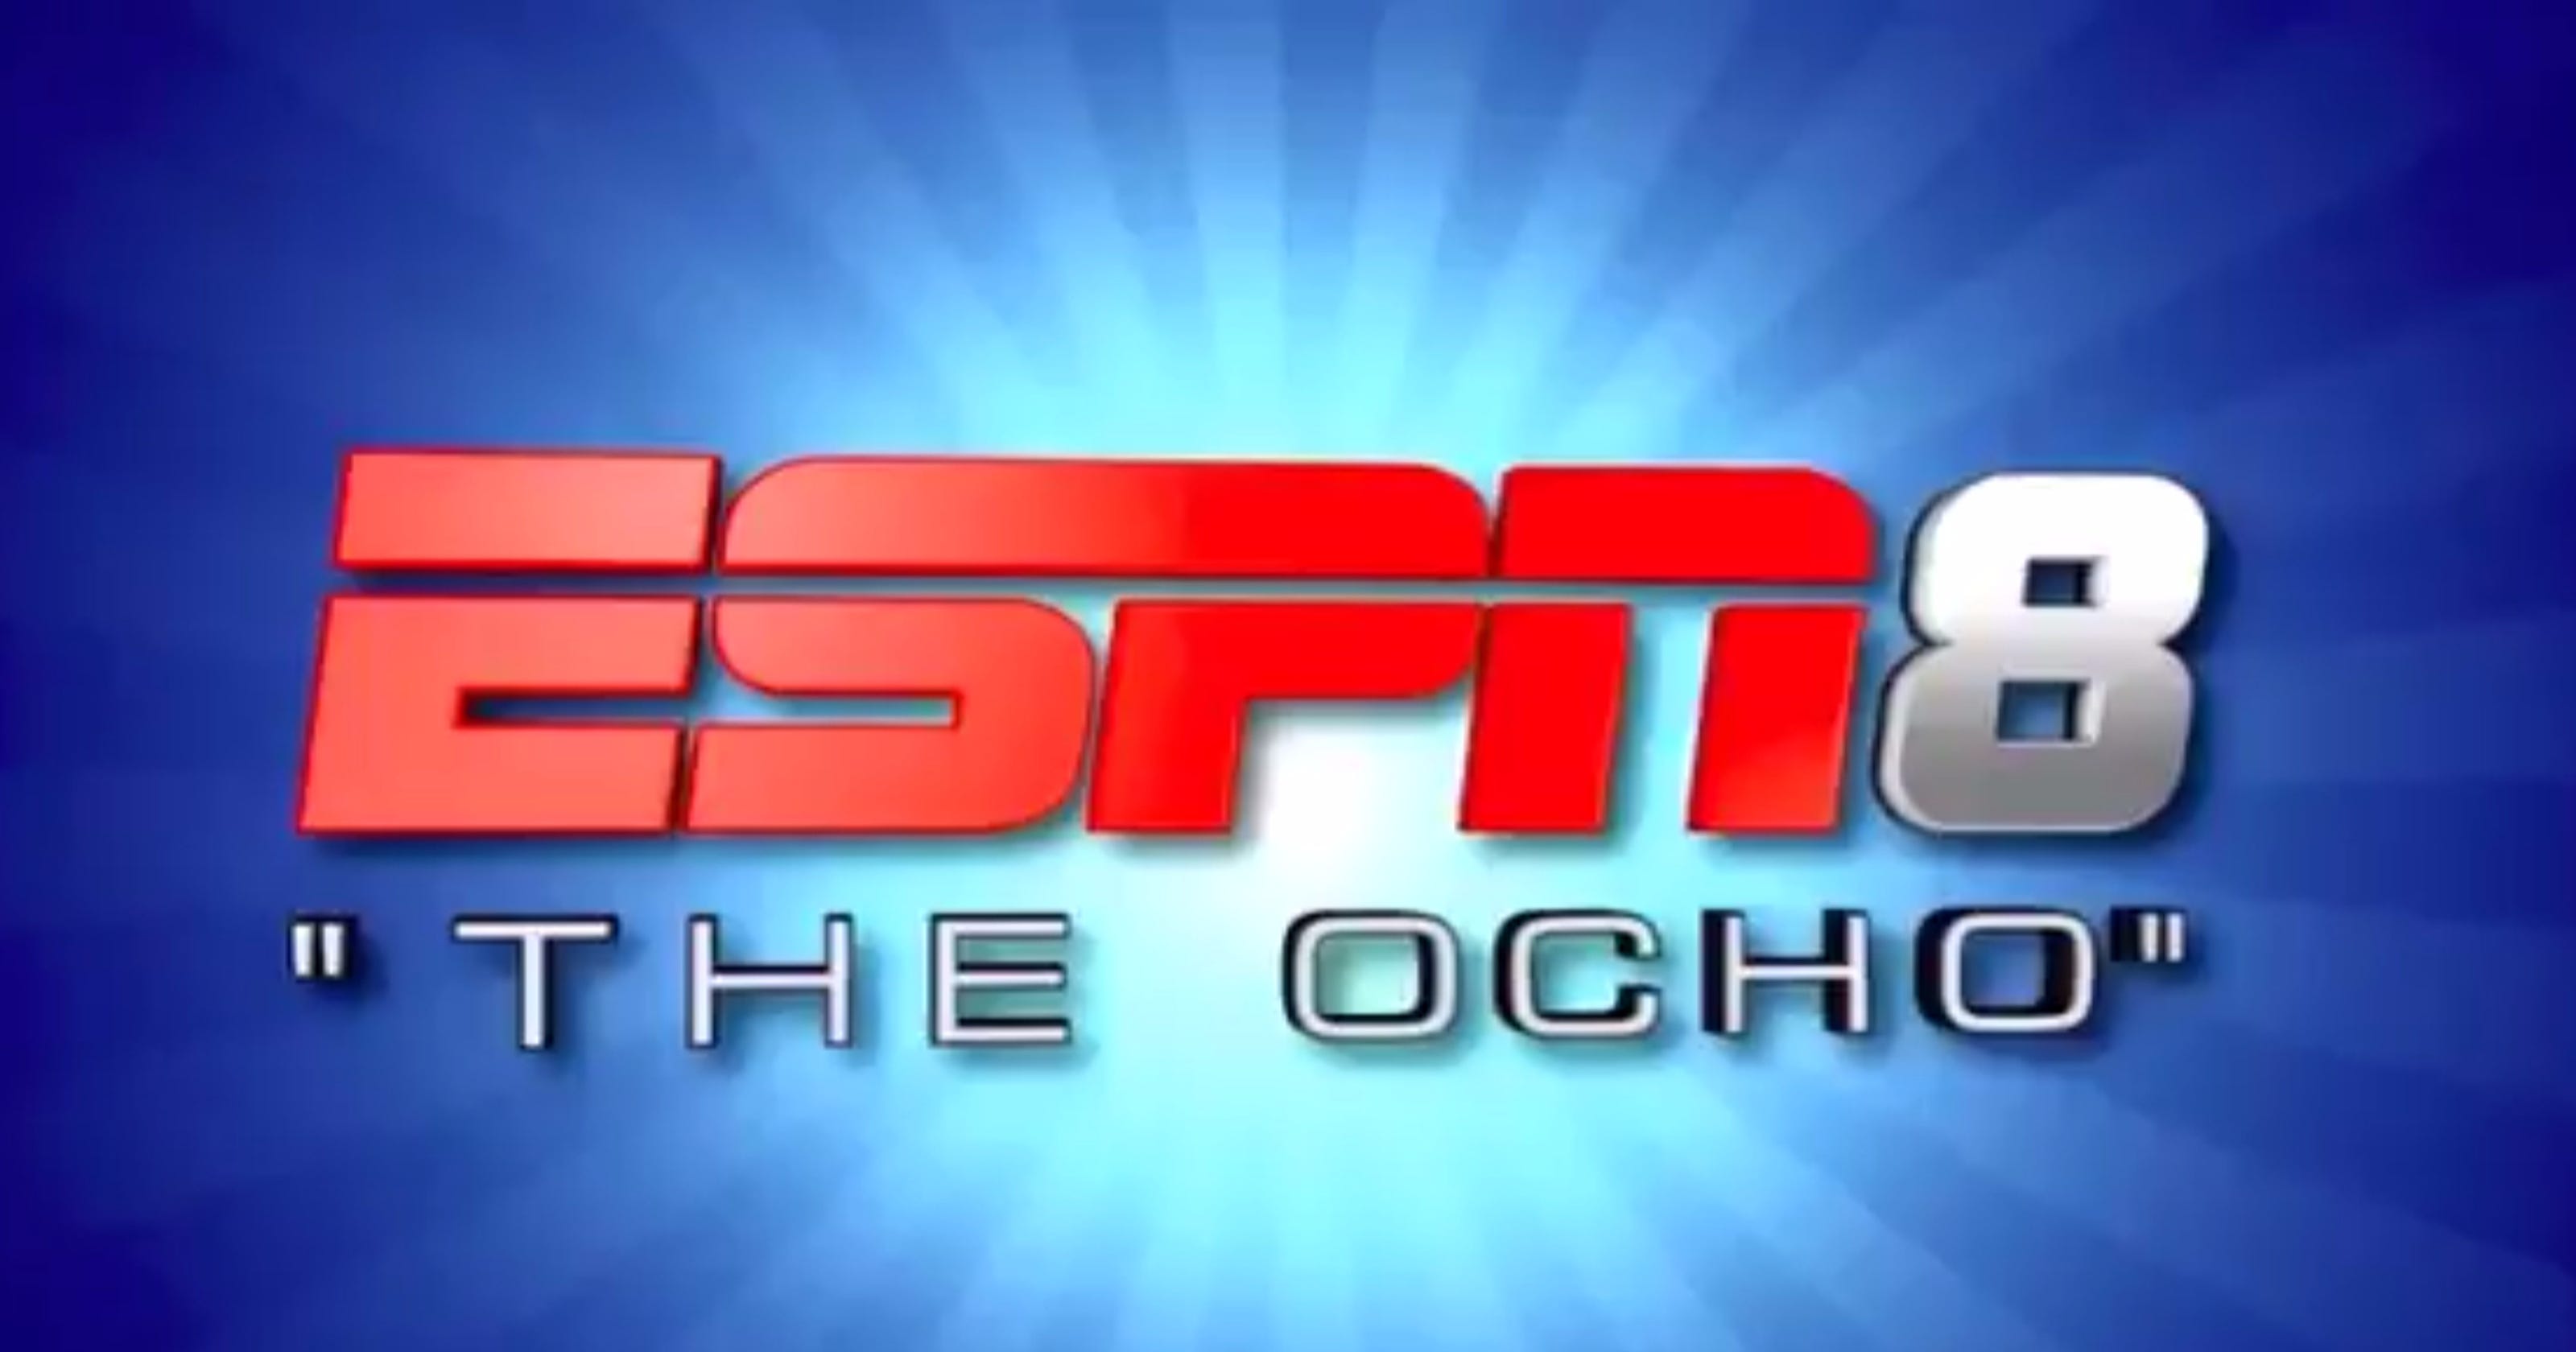 ESPN's 'The Ocho' is everything we hoped it'd be